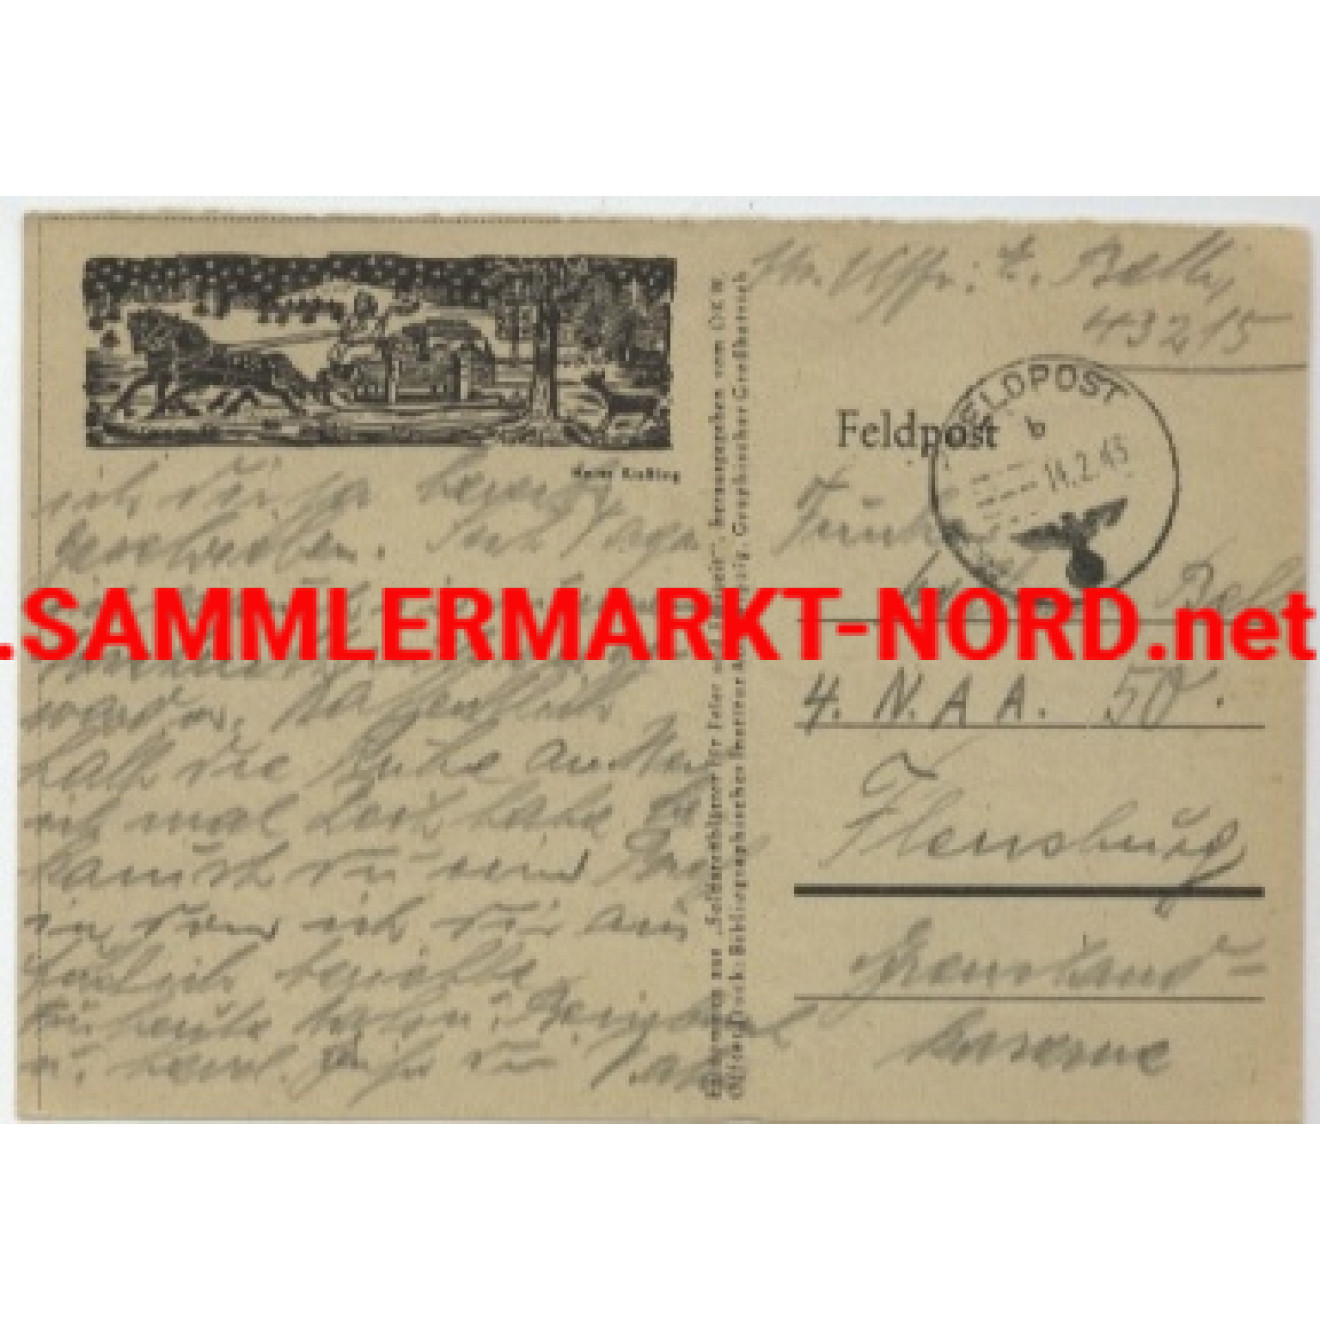 Army postal service card with illustration of a soldier with hor